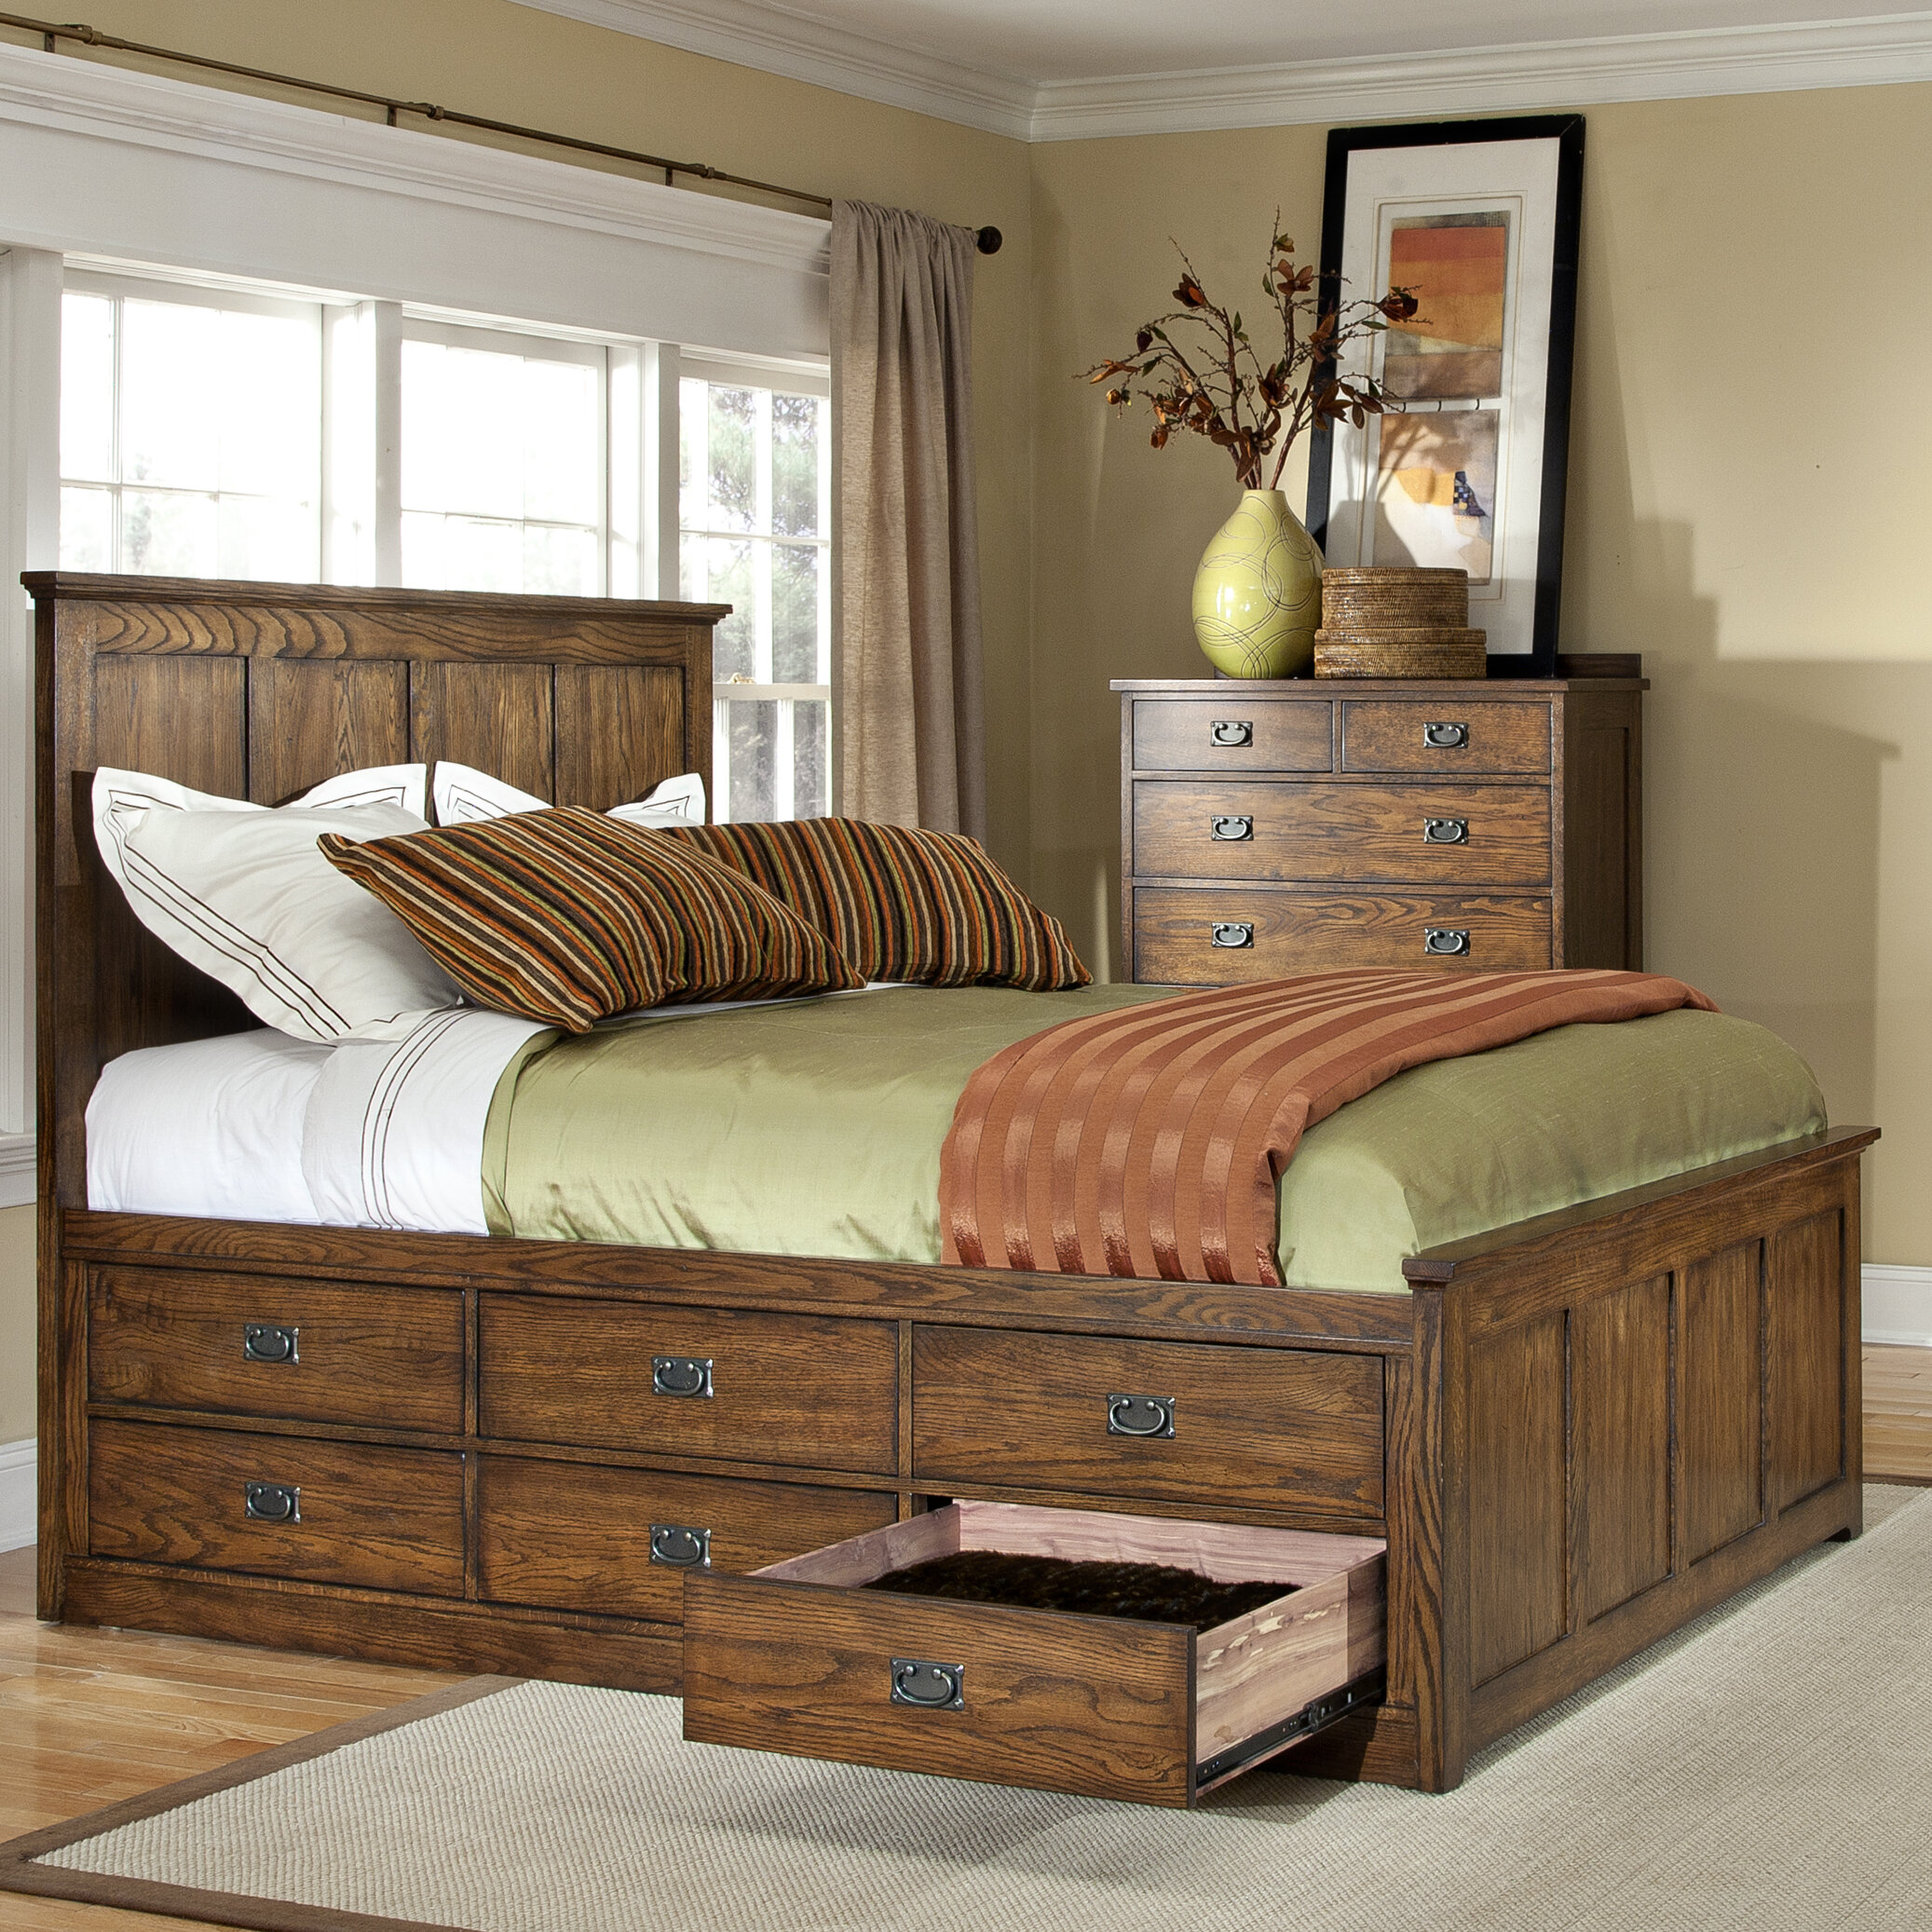 Bed With Drawers Underneath Visualhunt, King Single Bed Frame With Drawers Underneath